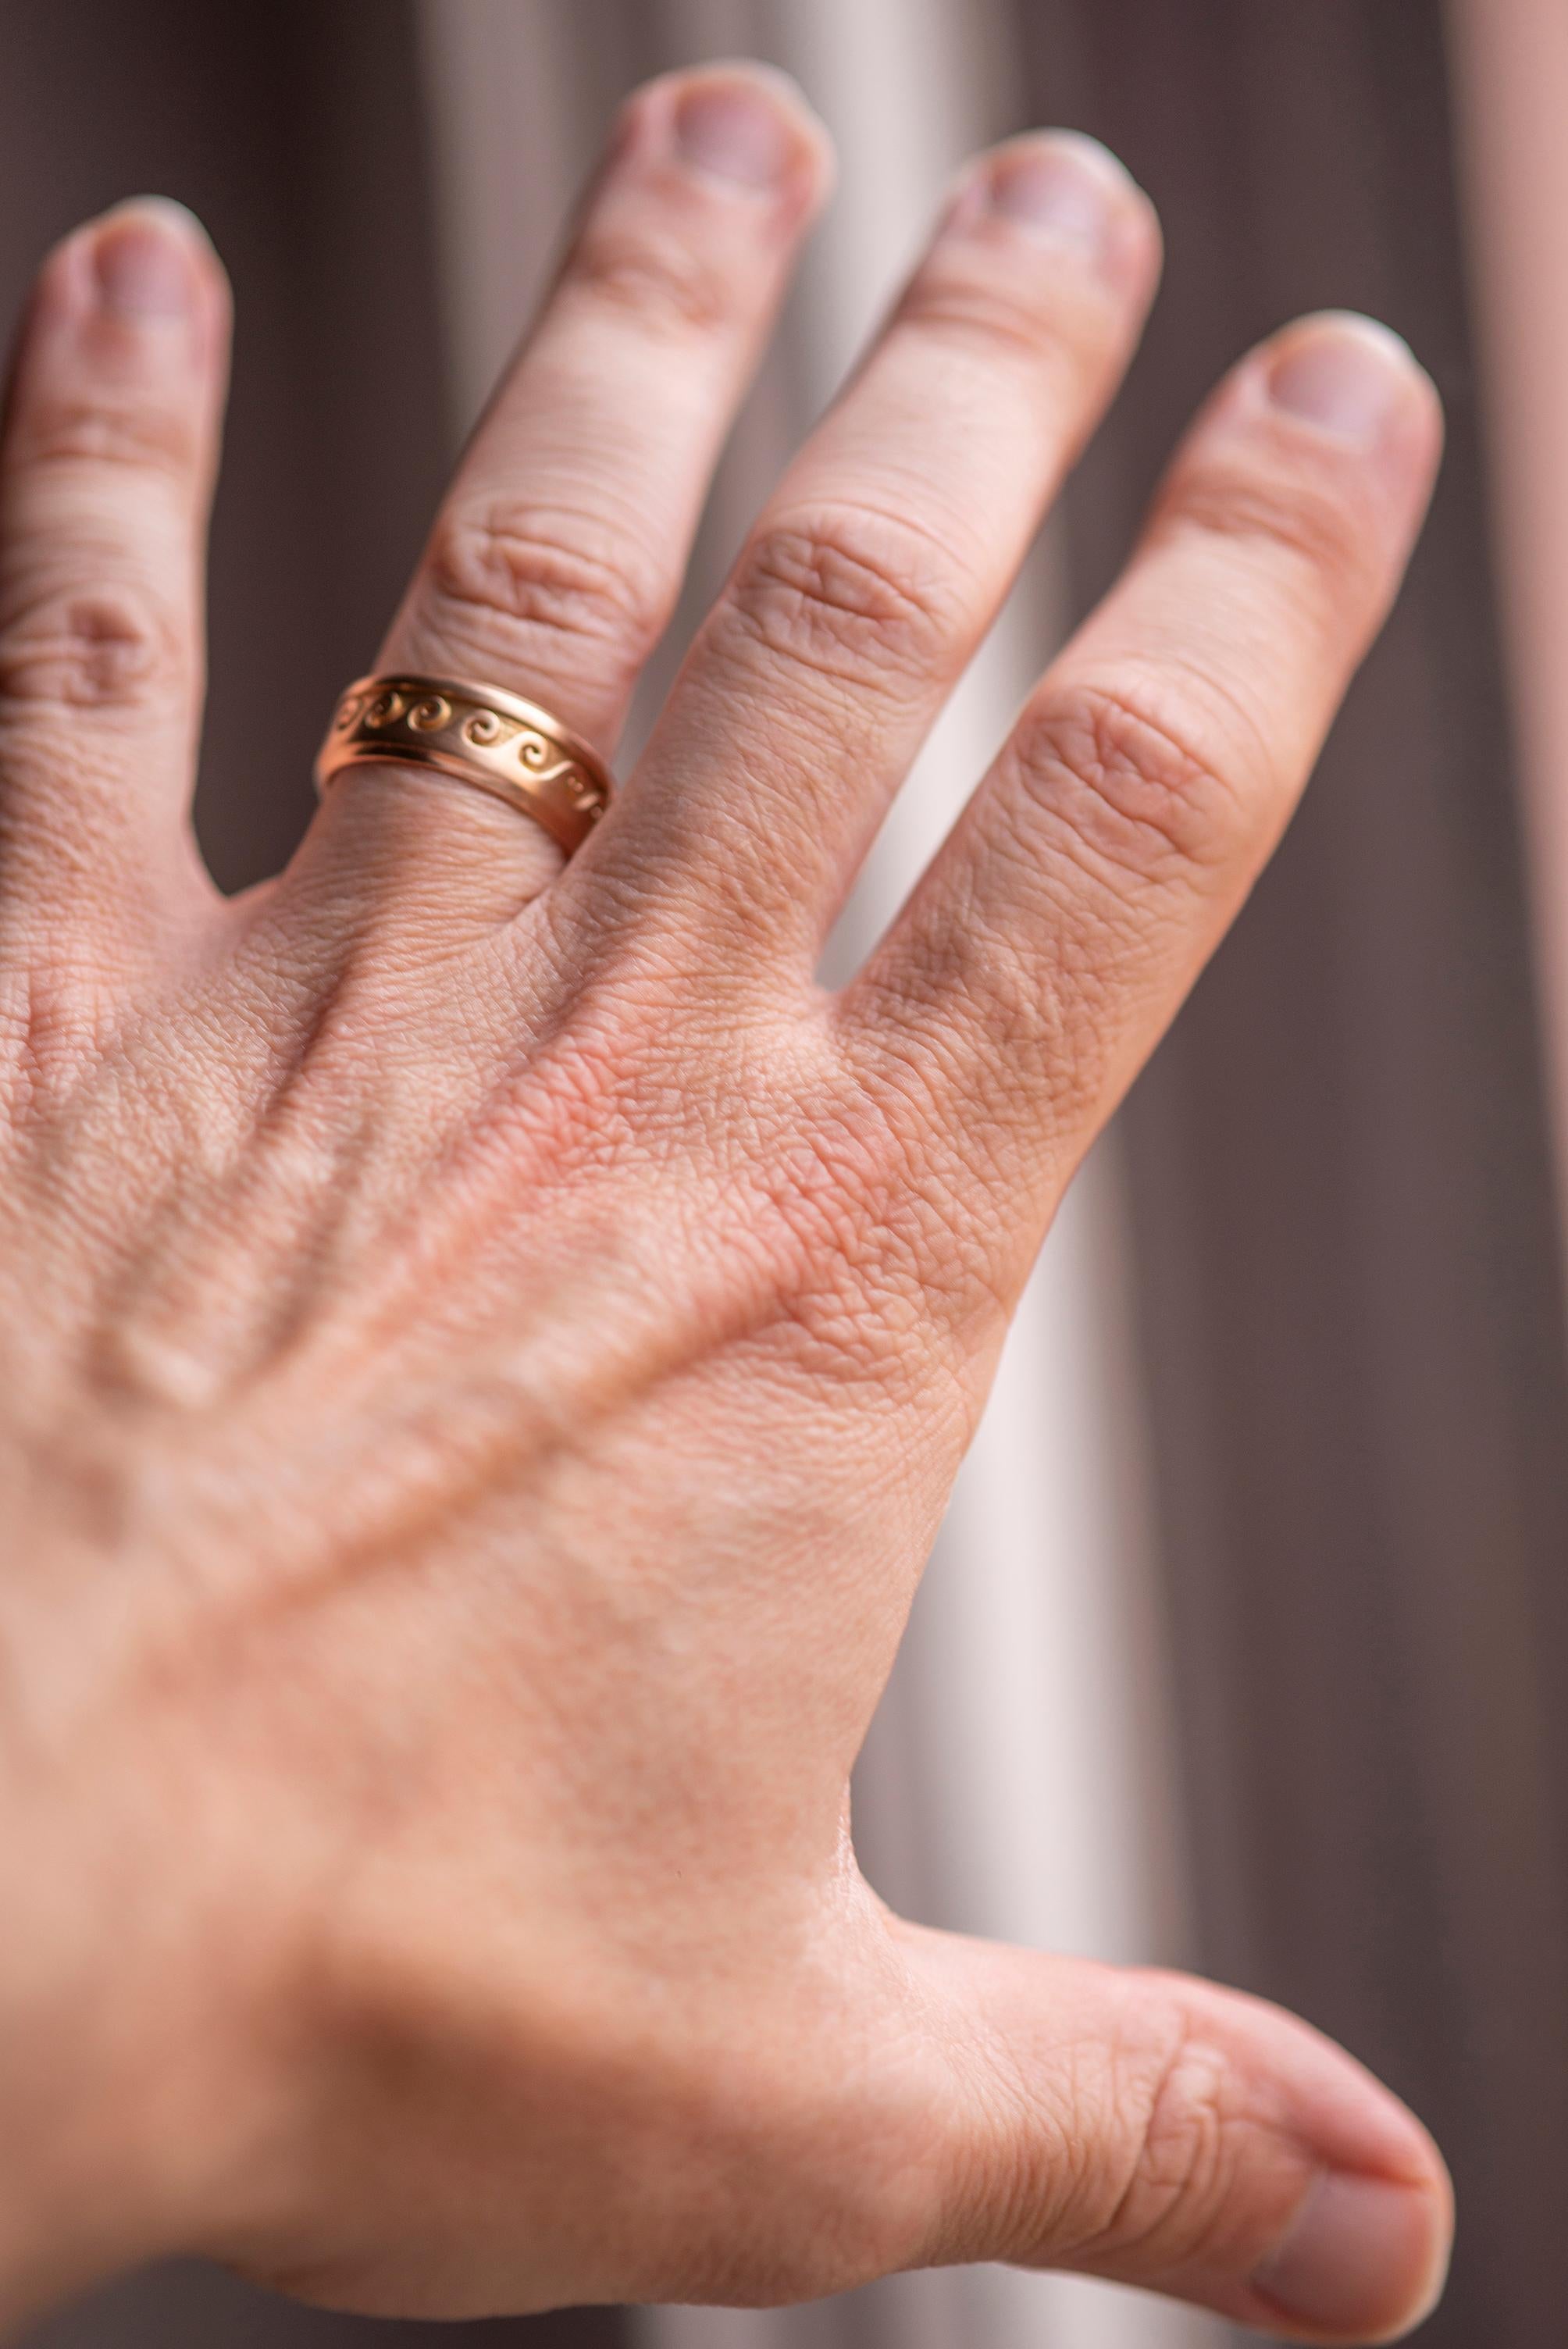 Handcrafted Unisex 18 Karat Rose Gold Embossed Wave Design Band Ring
Here there is an amazing design ring, handcrafted in 18 karats rose gold and embellished with an embossed wave.
This beautiful embossed effect is obtained with a fine technique by